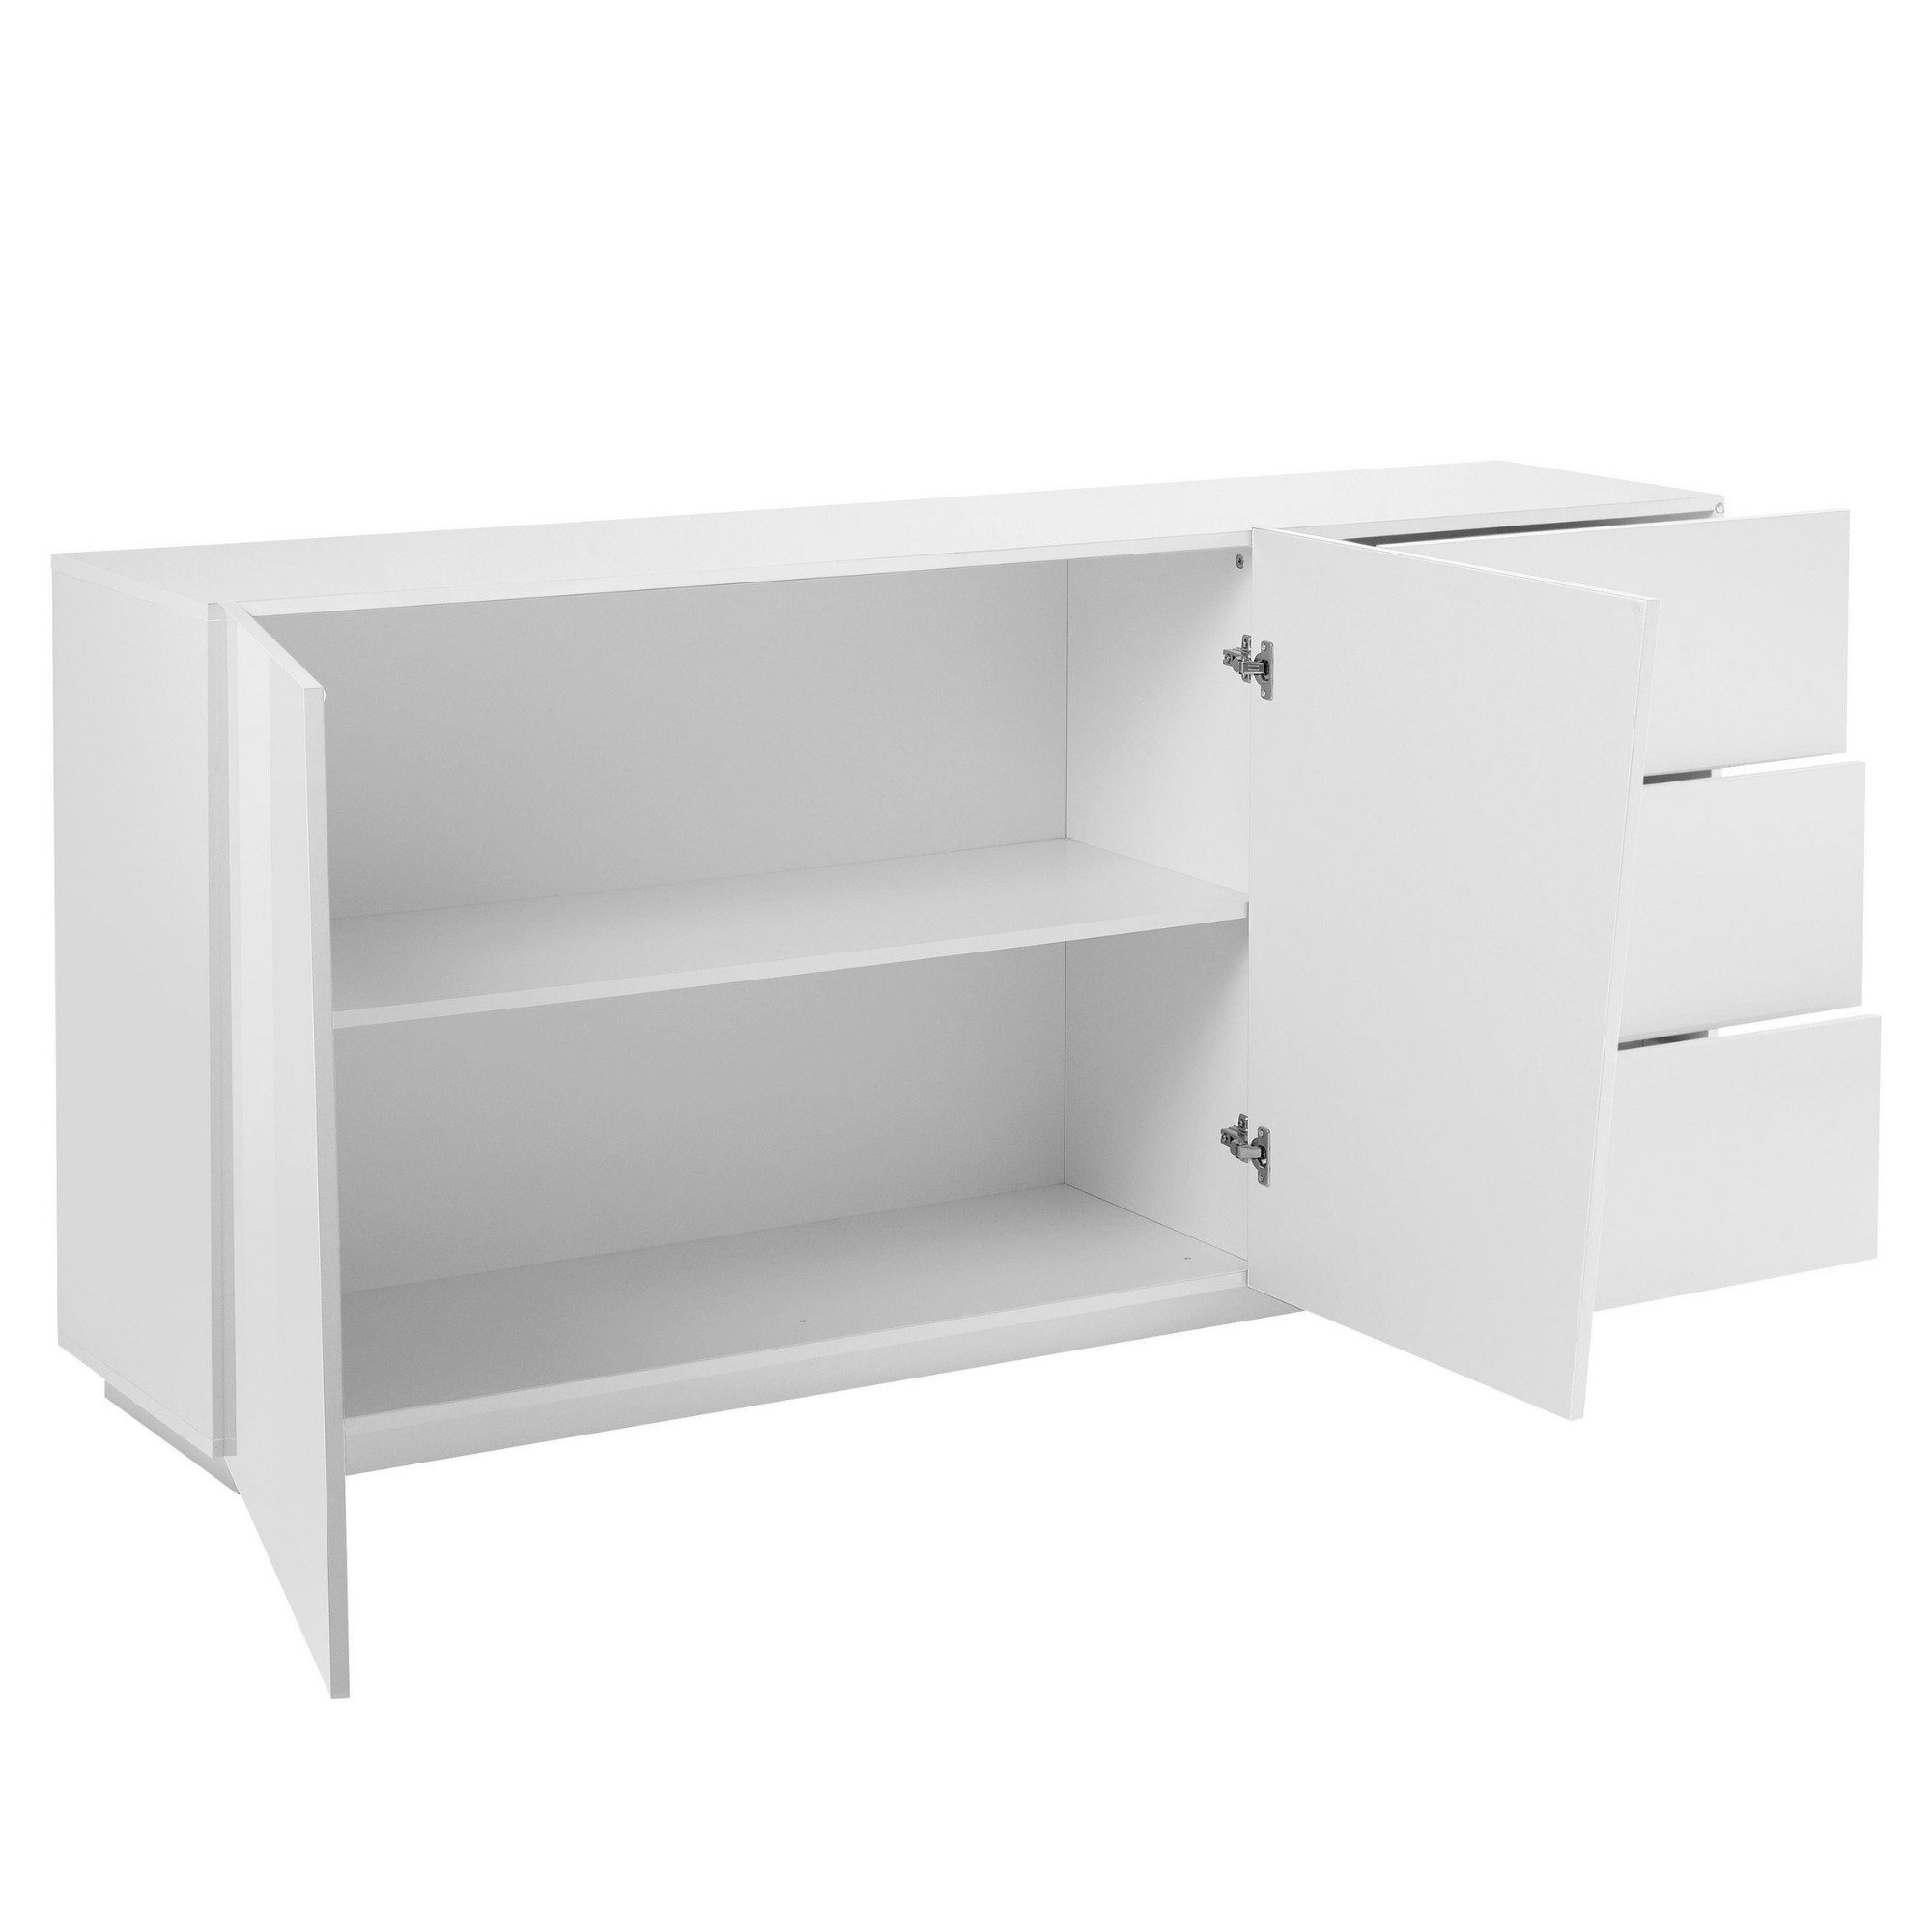 VEGA Sideboard with 2 Doors and 3 Drawers - Furniture.Agency